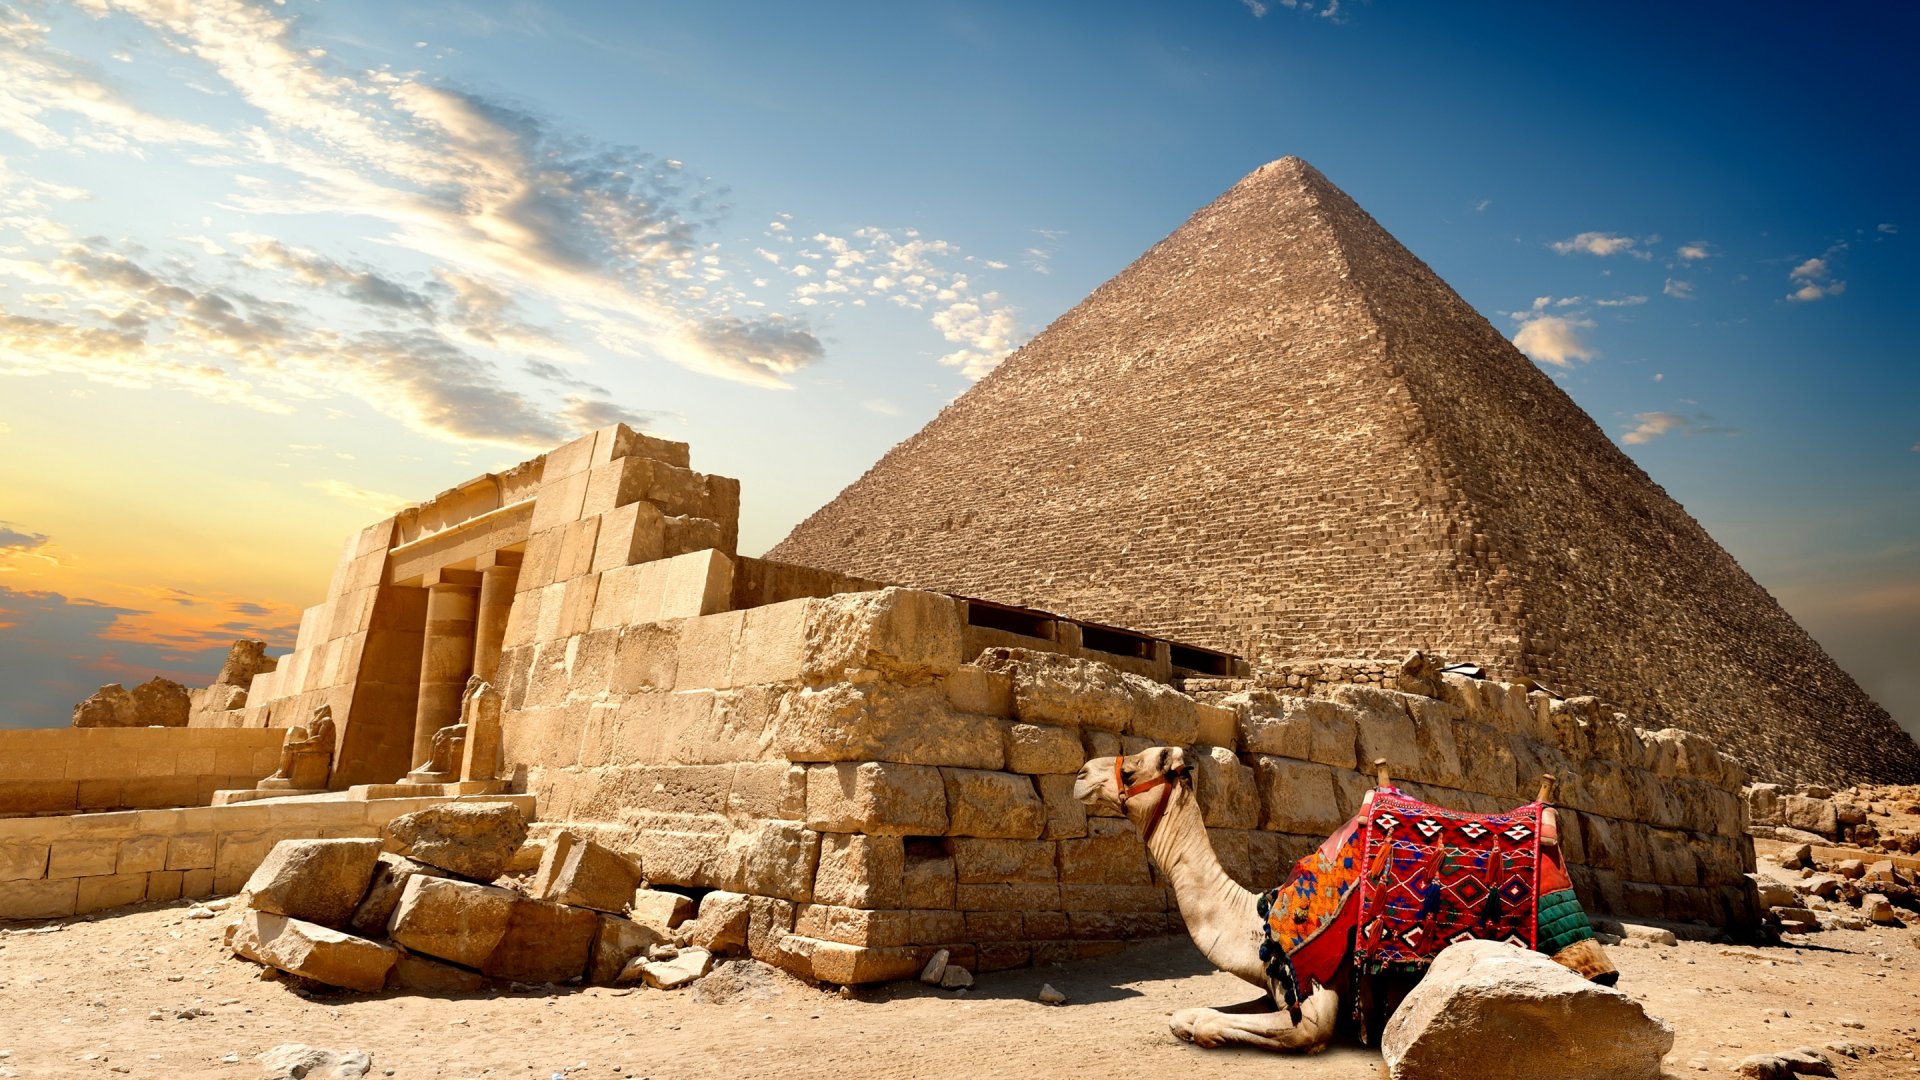 Cairo, Clouds, Sand, Egypt, Desert, Pyramid - National Geographic Egypt - 1920x1080  Wallpaper 